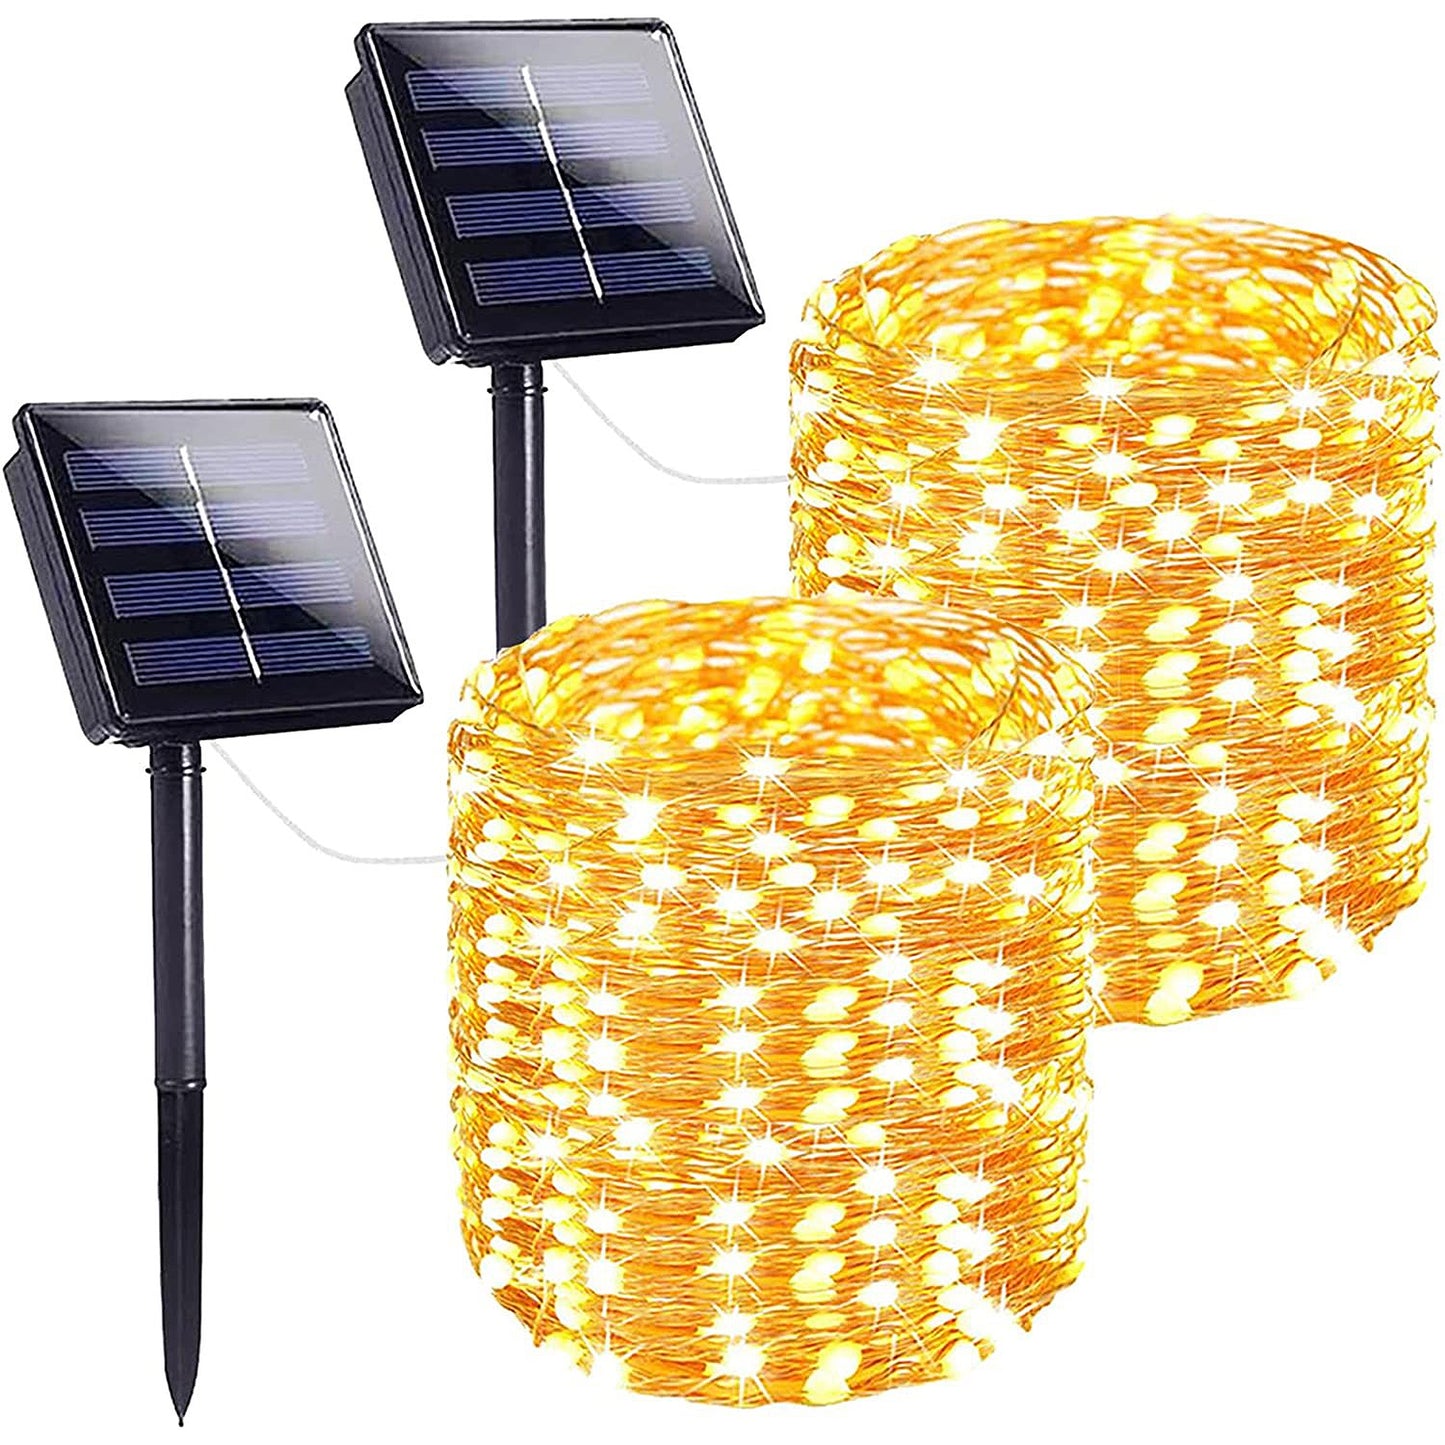 Solar String Lights Outdoor Christmas Tree Decorations ip44 Waterproof Fairy Lights for Patio Camping Garden with Voice Control